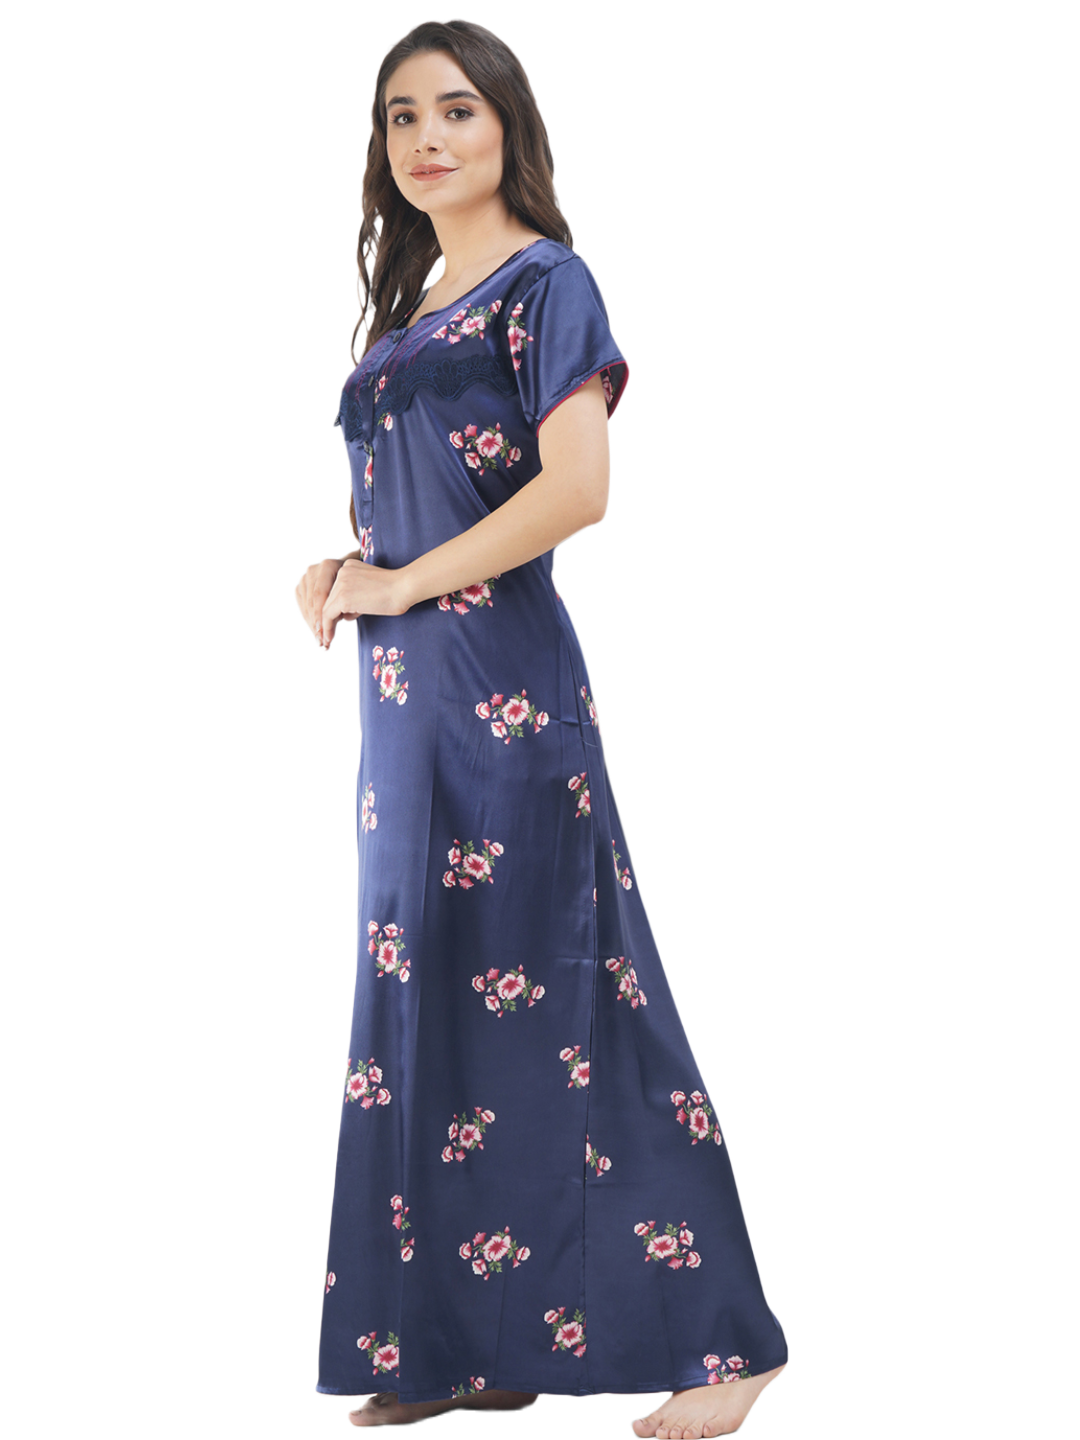 Satin Night gown with Floral print